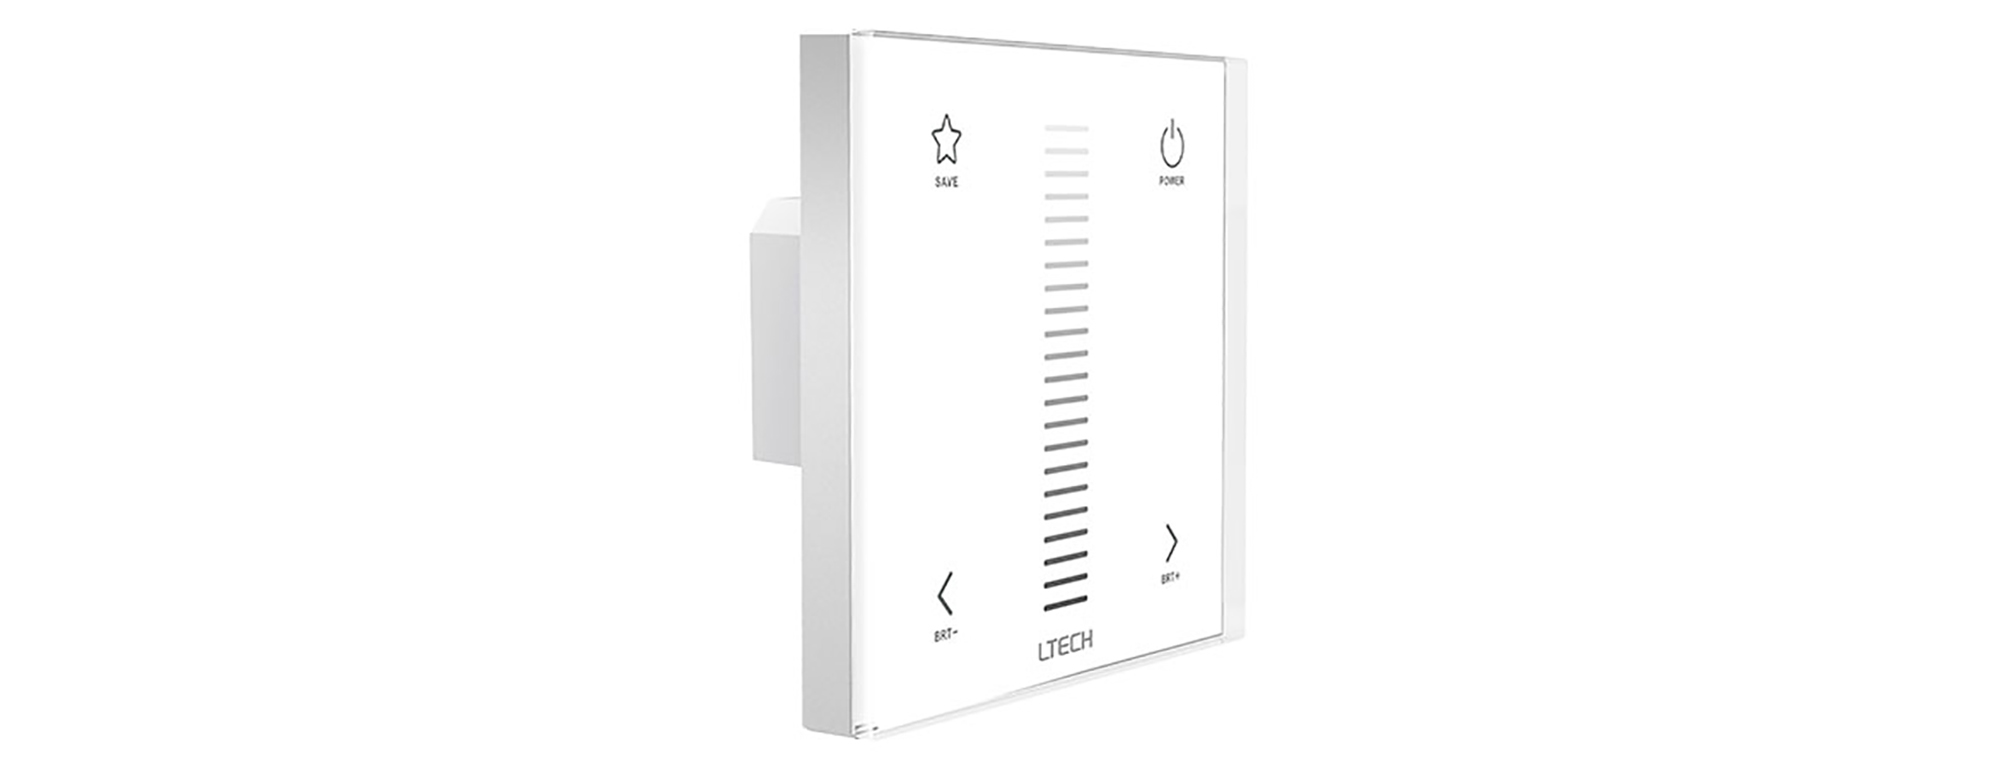 E1  RF2.4GHz CCT dim Touch Panel, PWM Power output, 12-24Vdc, 192W 4A×2CH, Single/Multi Zone Support.